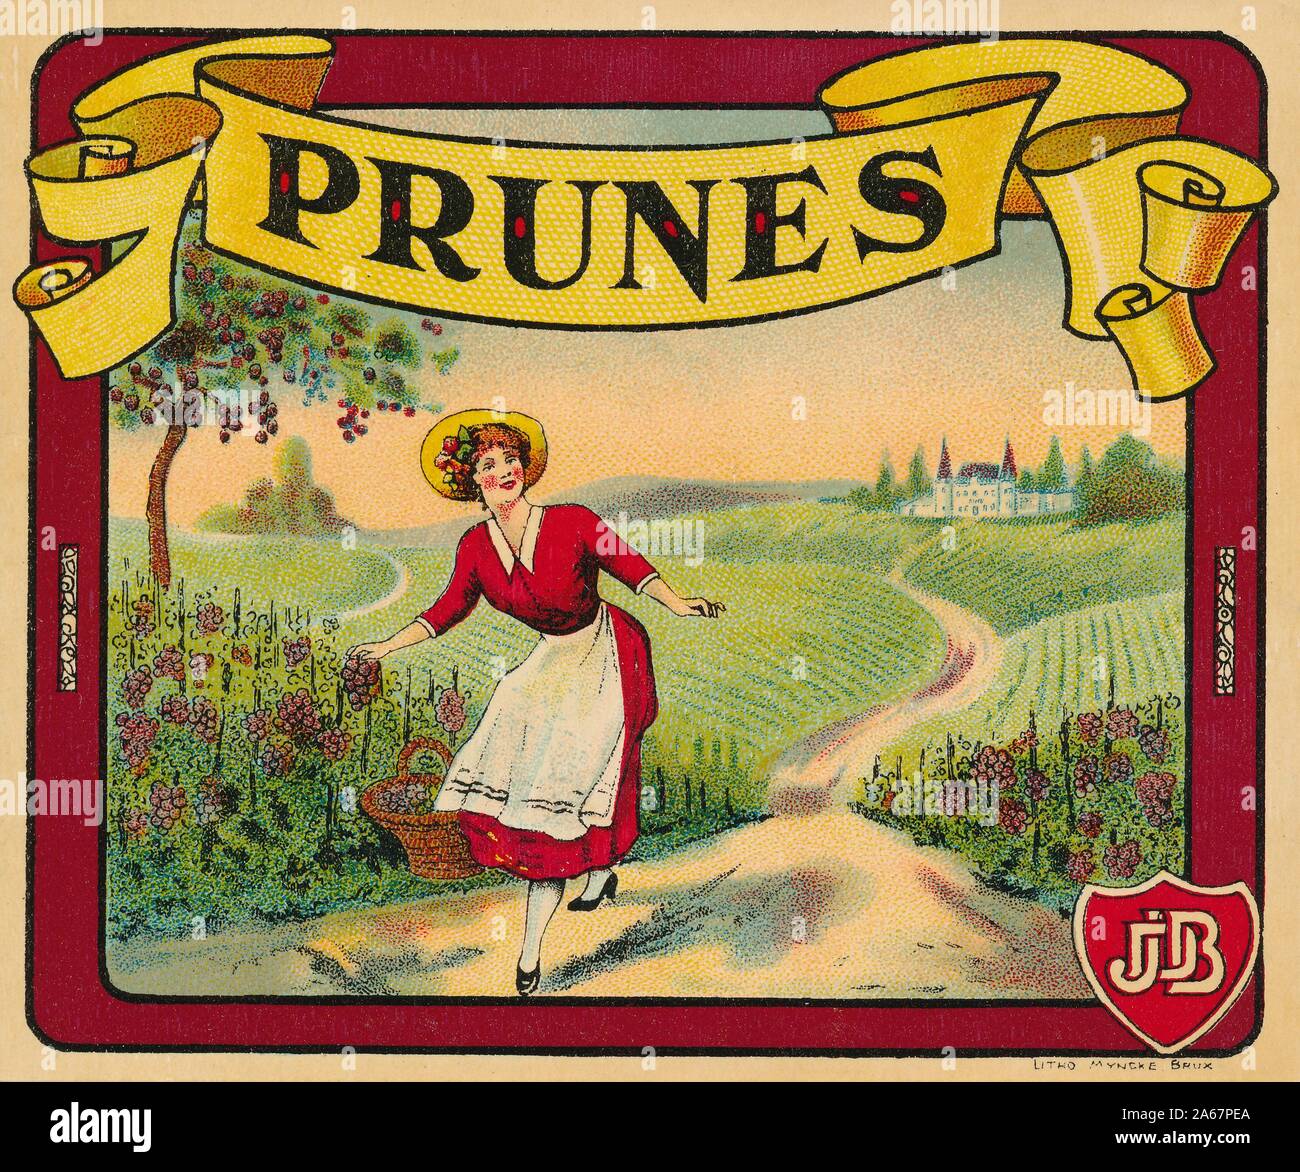 Label from a box or crate of 'Prunes, ' with an image of woman picking grapes in a rural setting with a chateau in the background, and with the initials 'JDB' intertwined on a shield in the lower right corner, likely produced in France, 1915. () Stock Photo